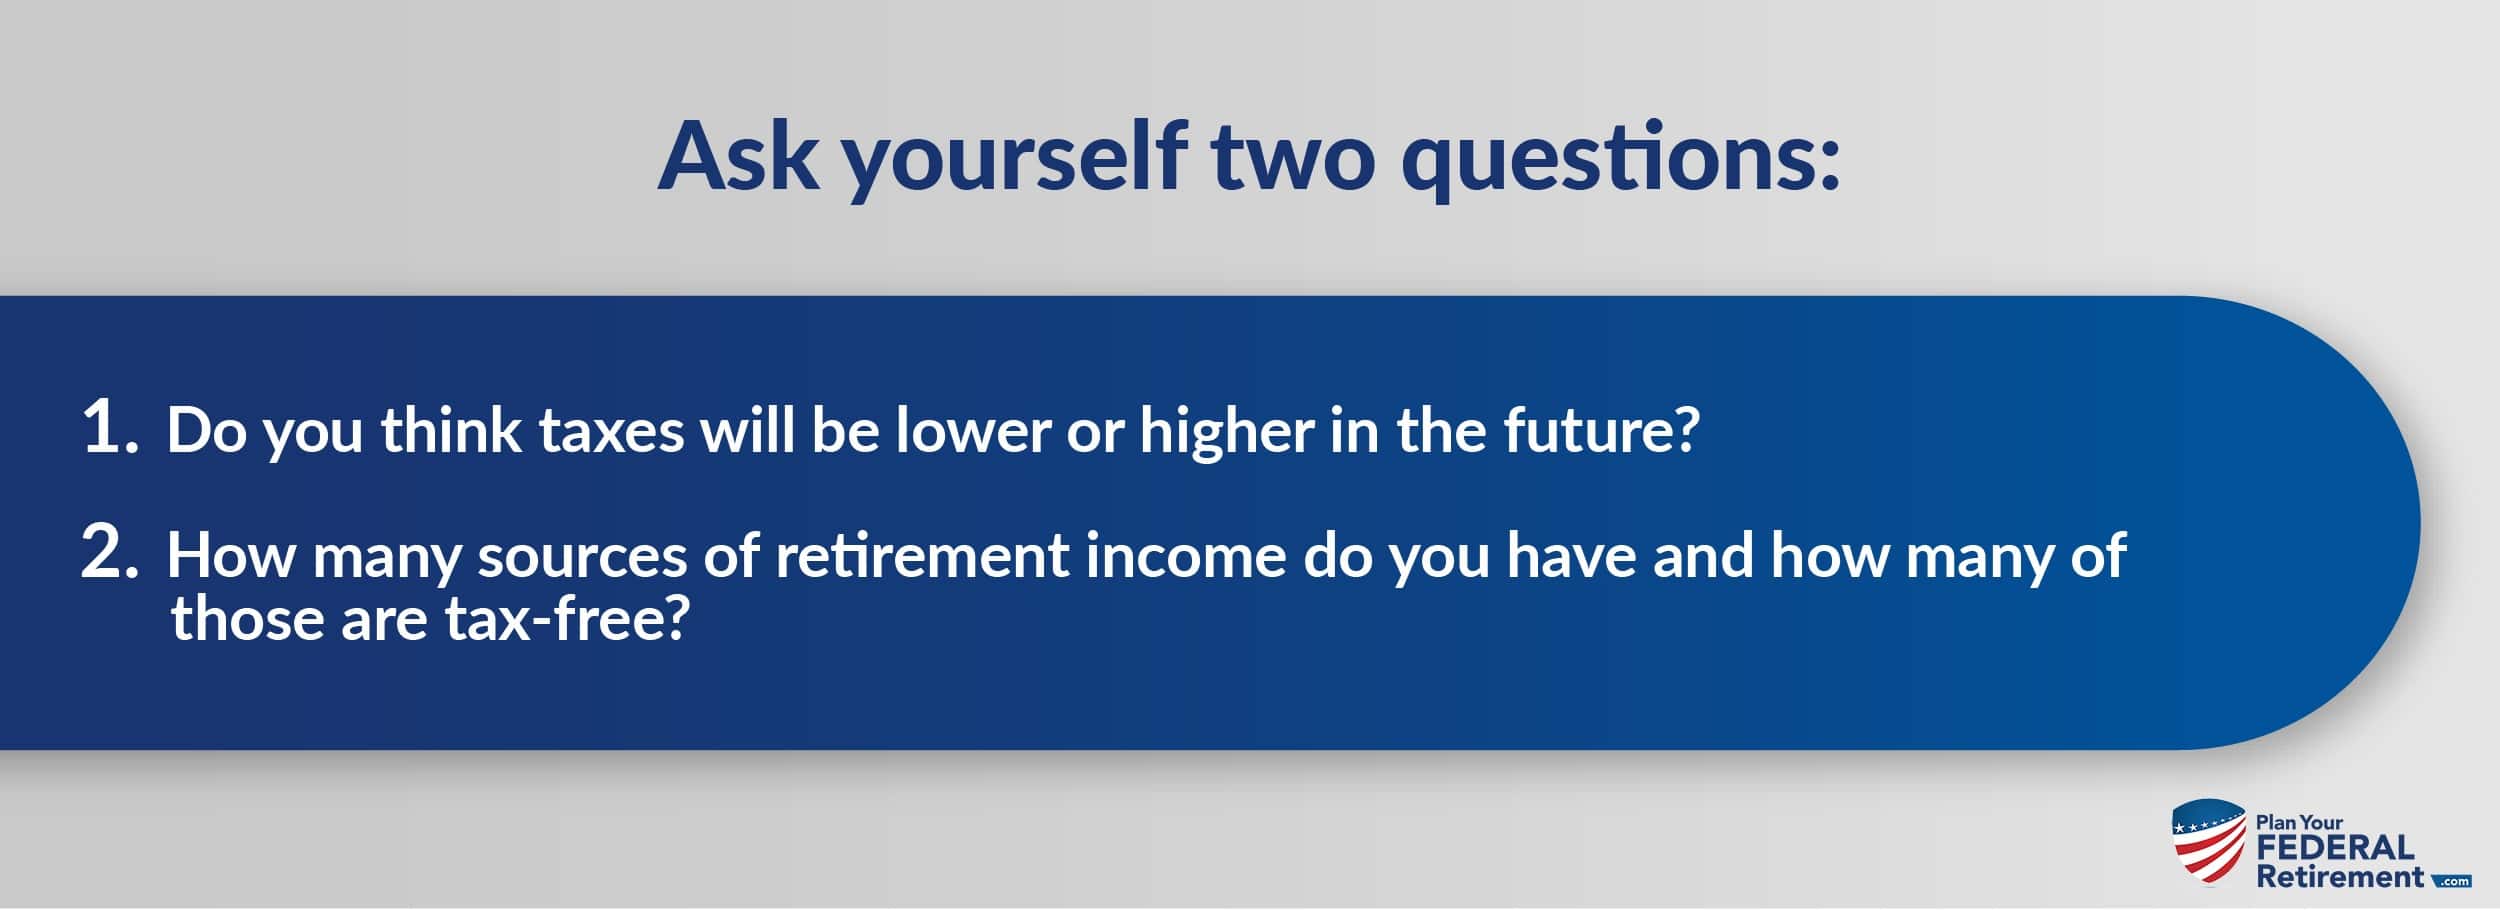 Two Questions to ask yourself about tax